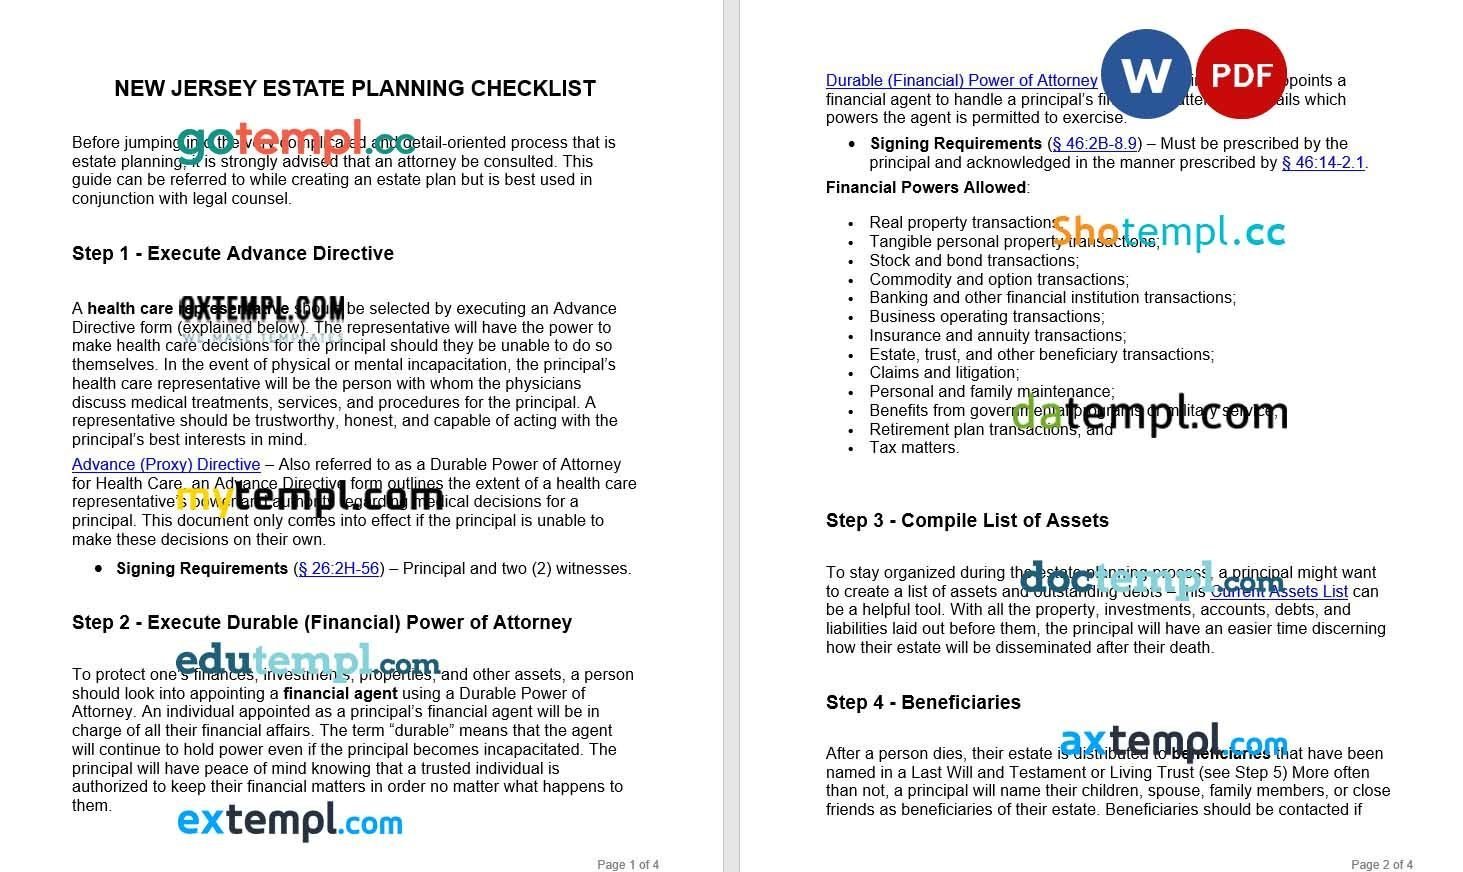 New Jersey Estate Planning Checklist example, fully editable